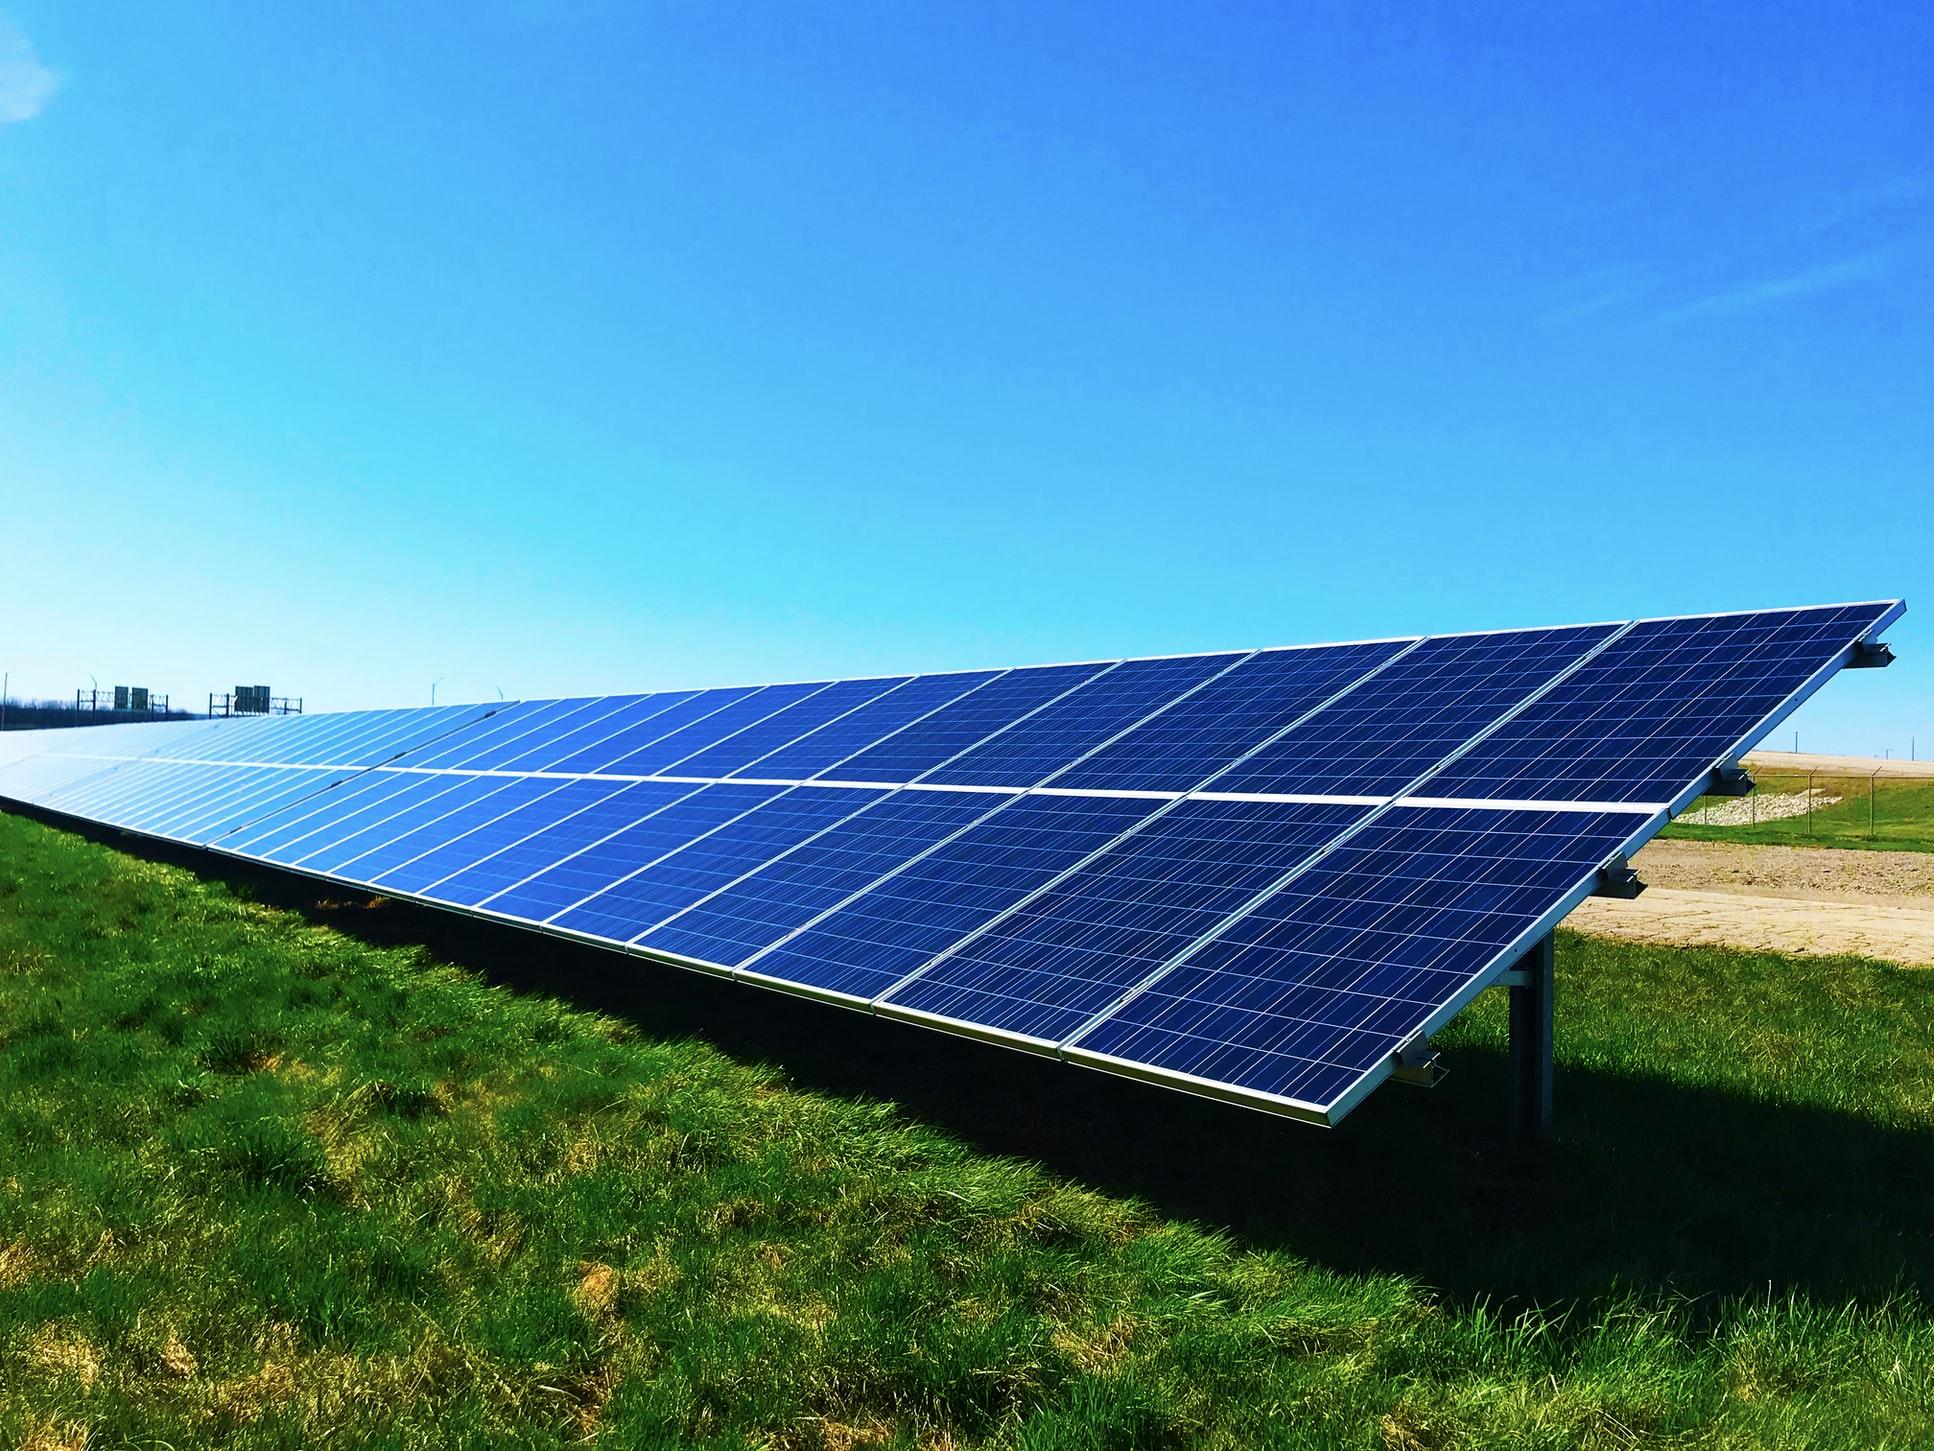 Ground-mounted solar panels in field